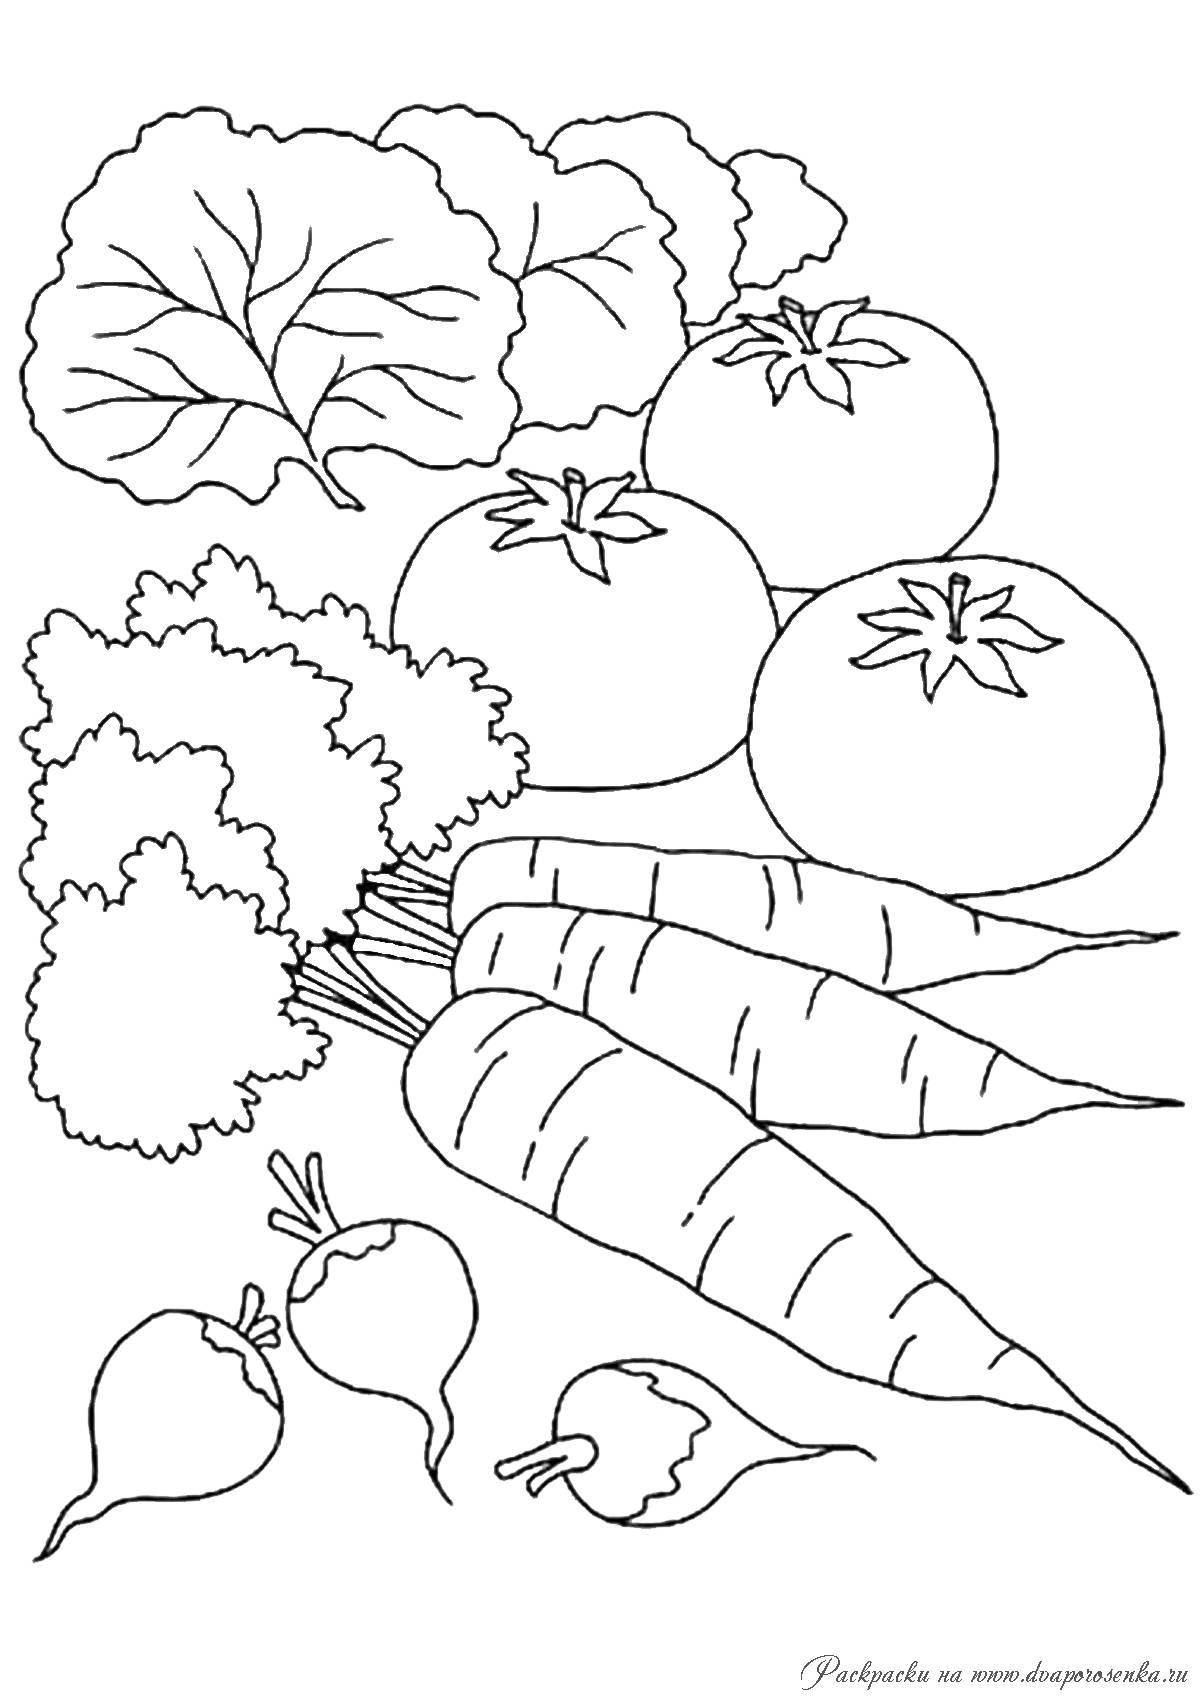 Colorful vegetable garden coloring book for children